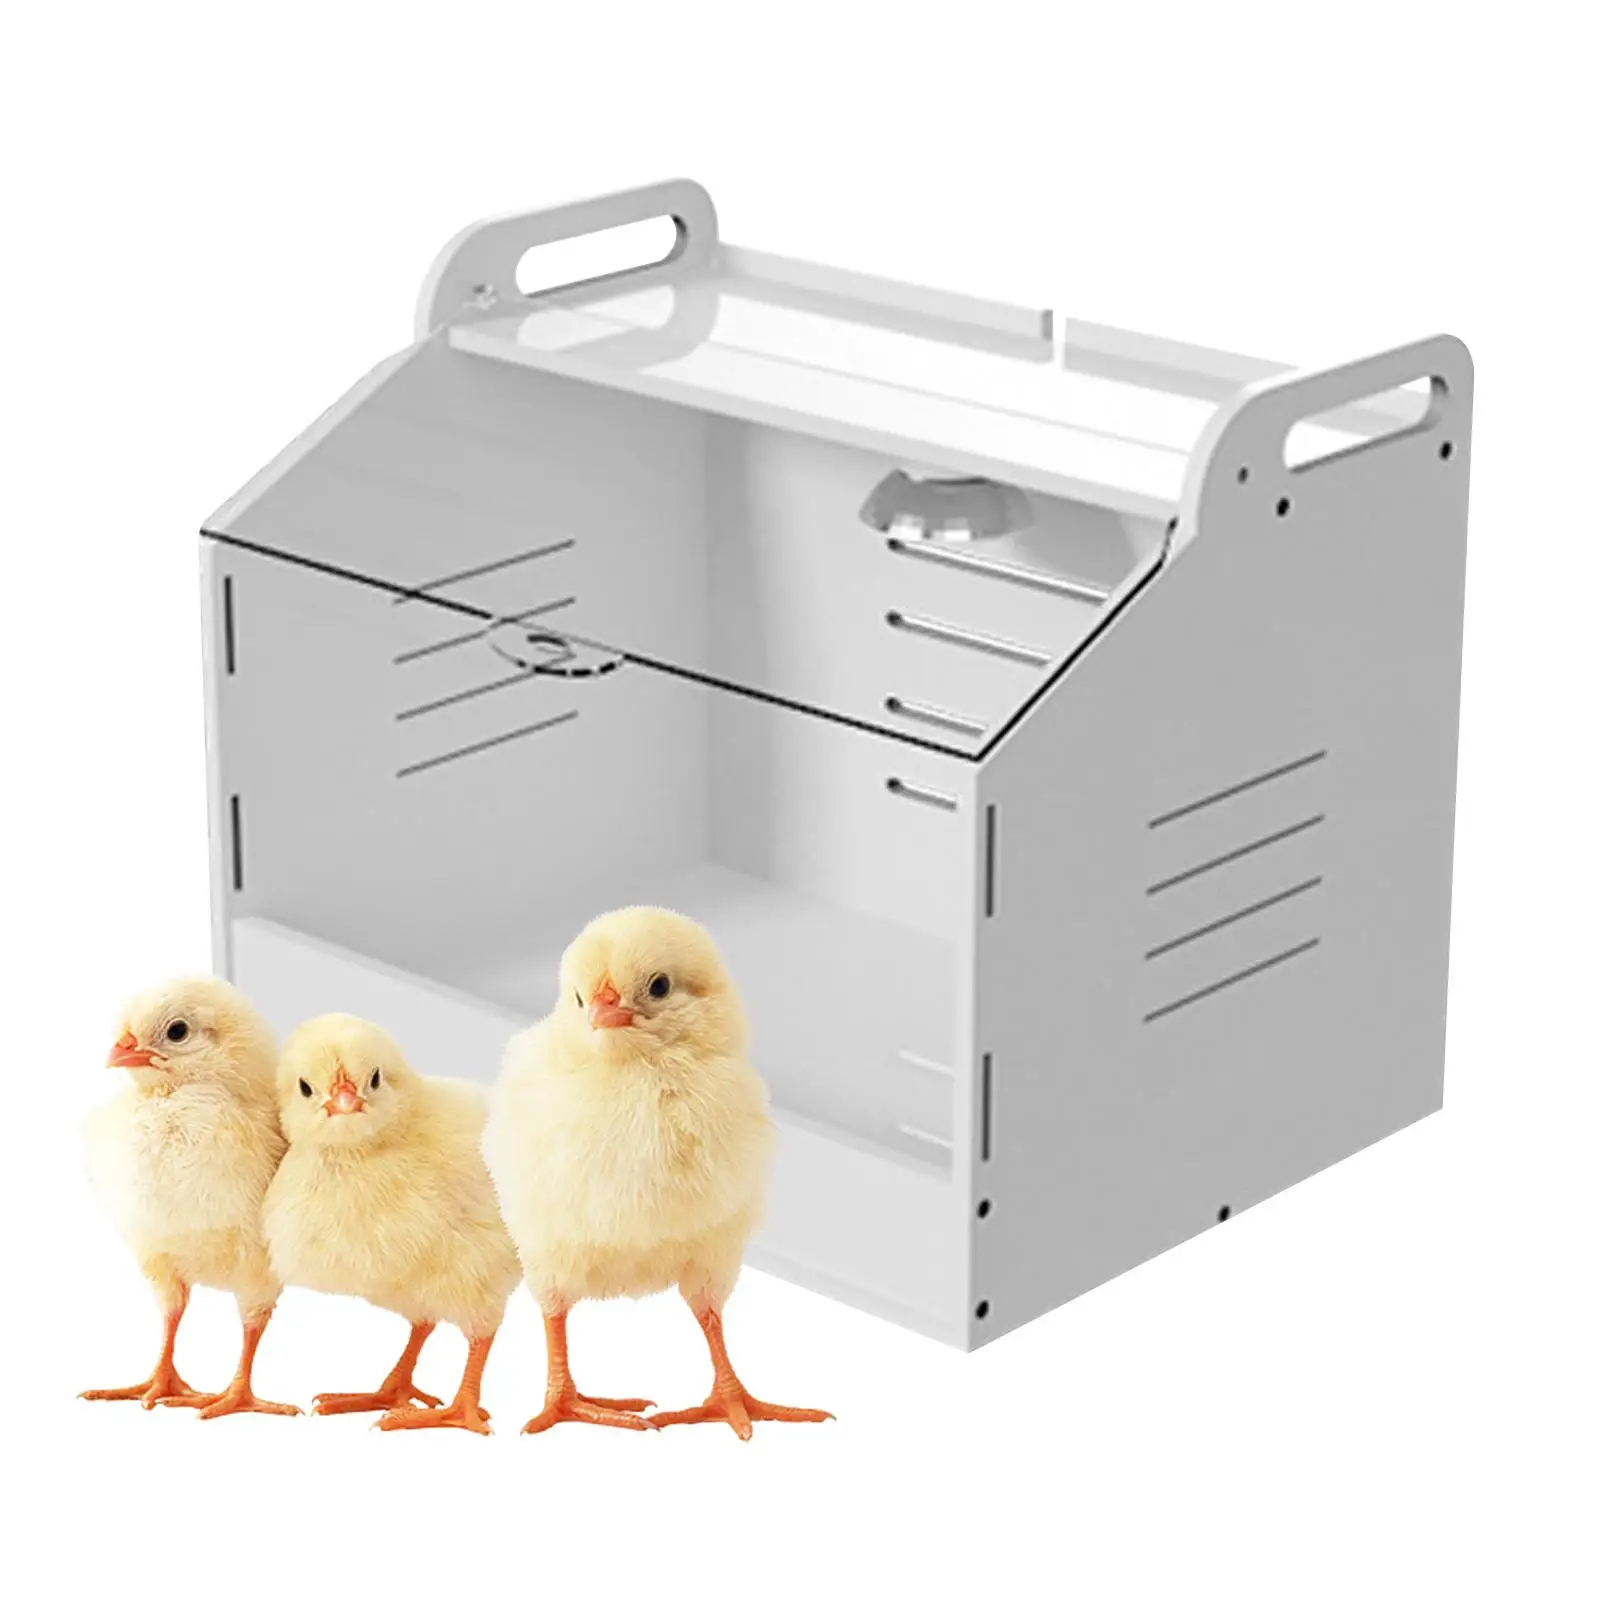 

Automatic Poultry Hatcher Machine Hatching Poultry Incubation Box Egg Incubator Farm Equipment for Parakeet Turkey Quail Chicken